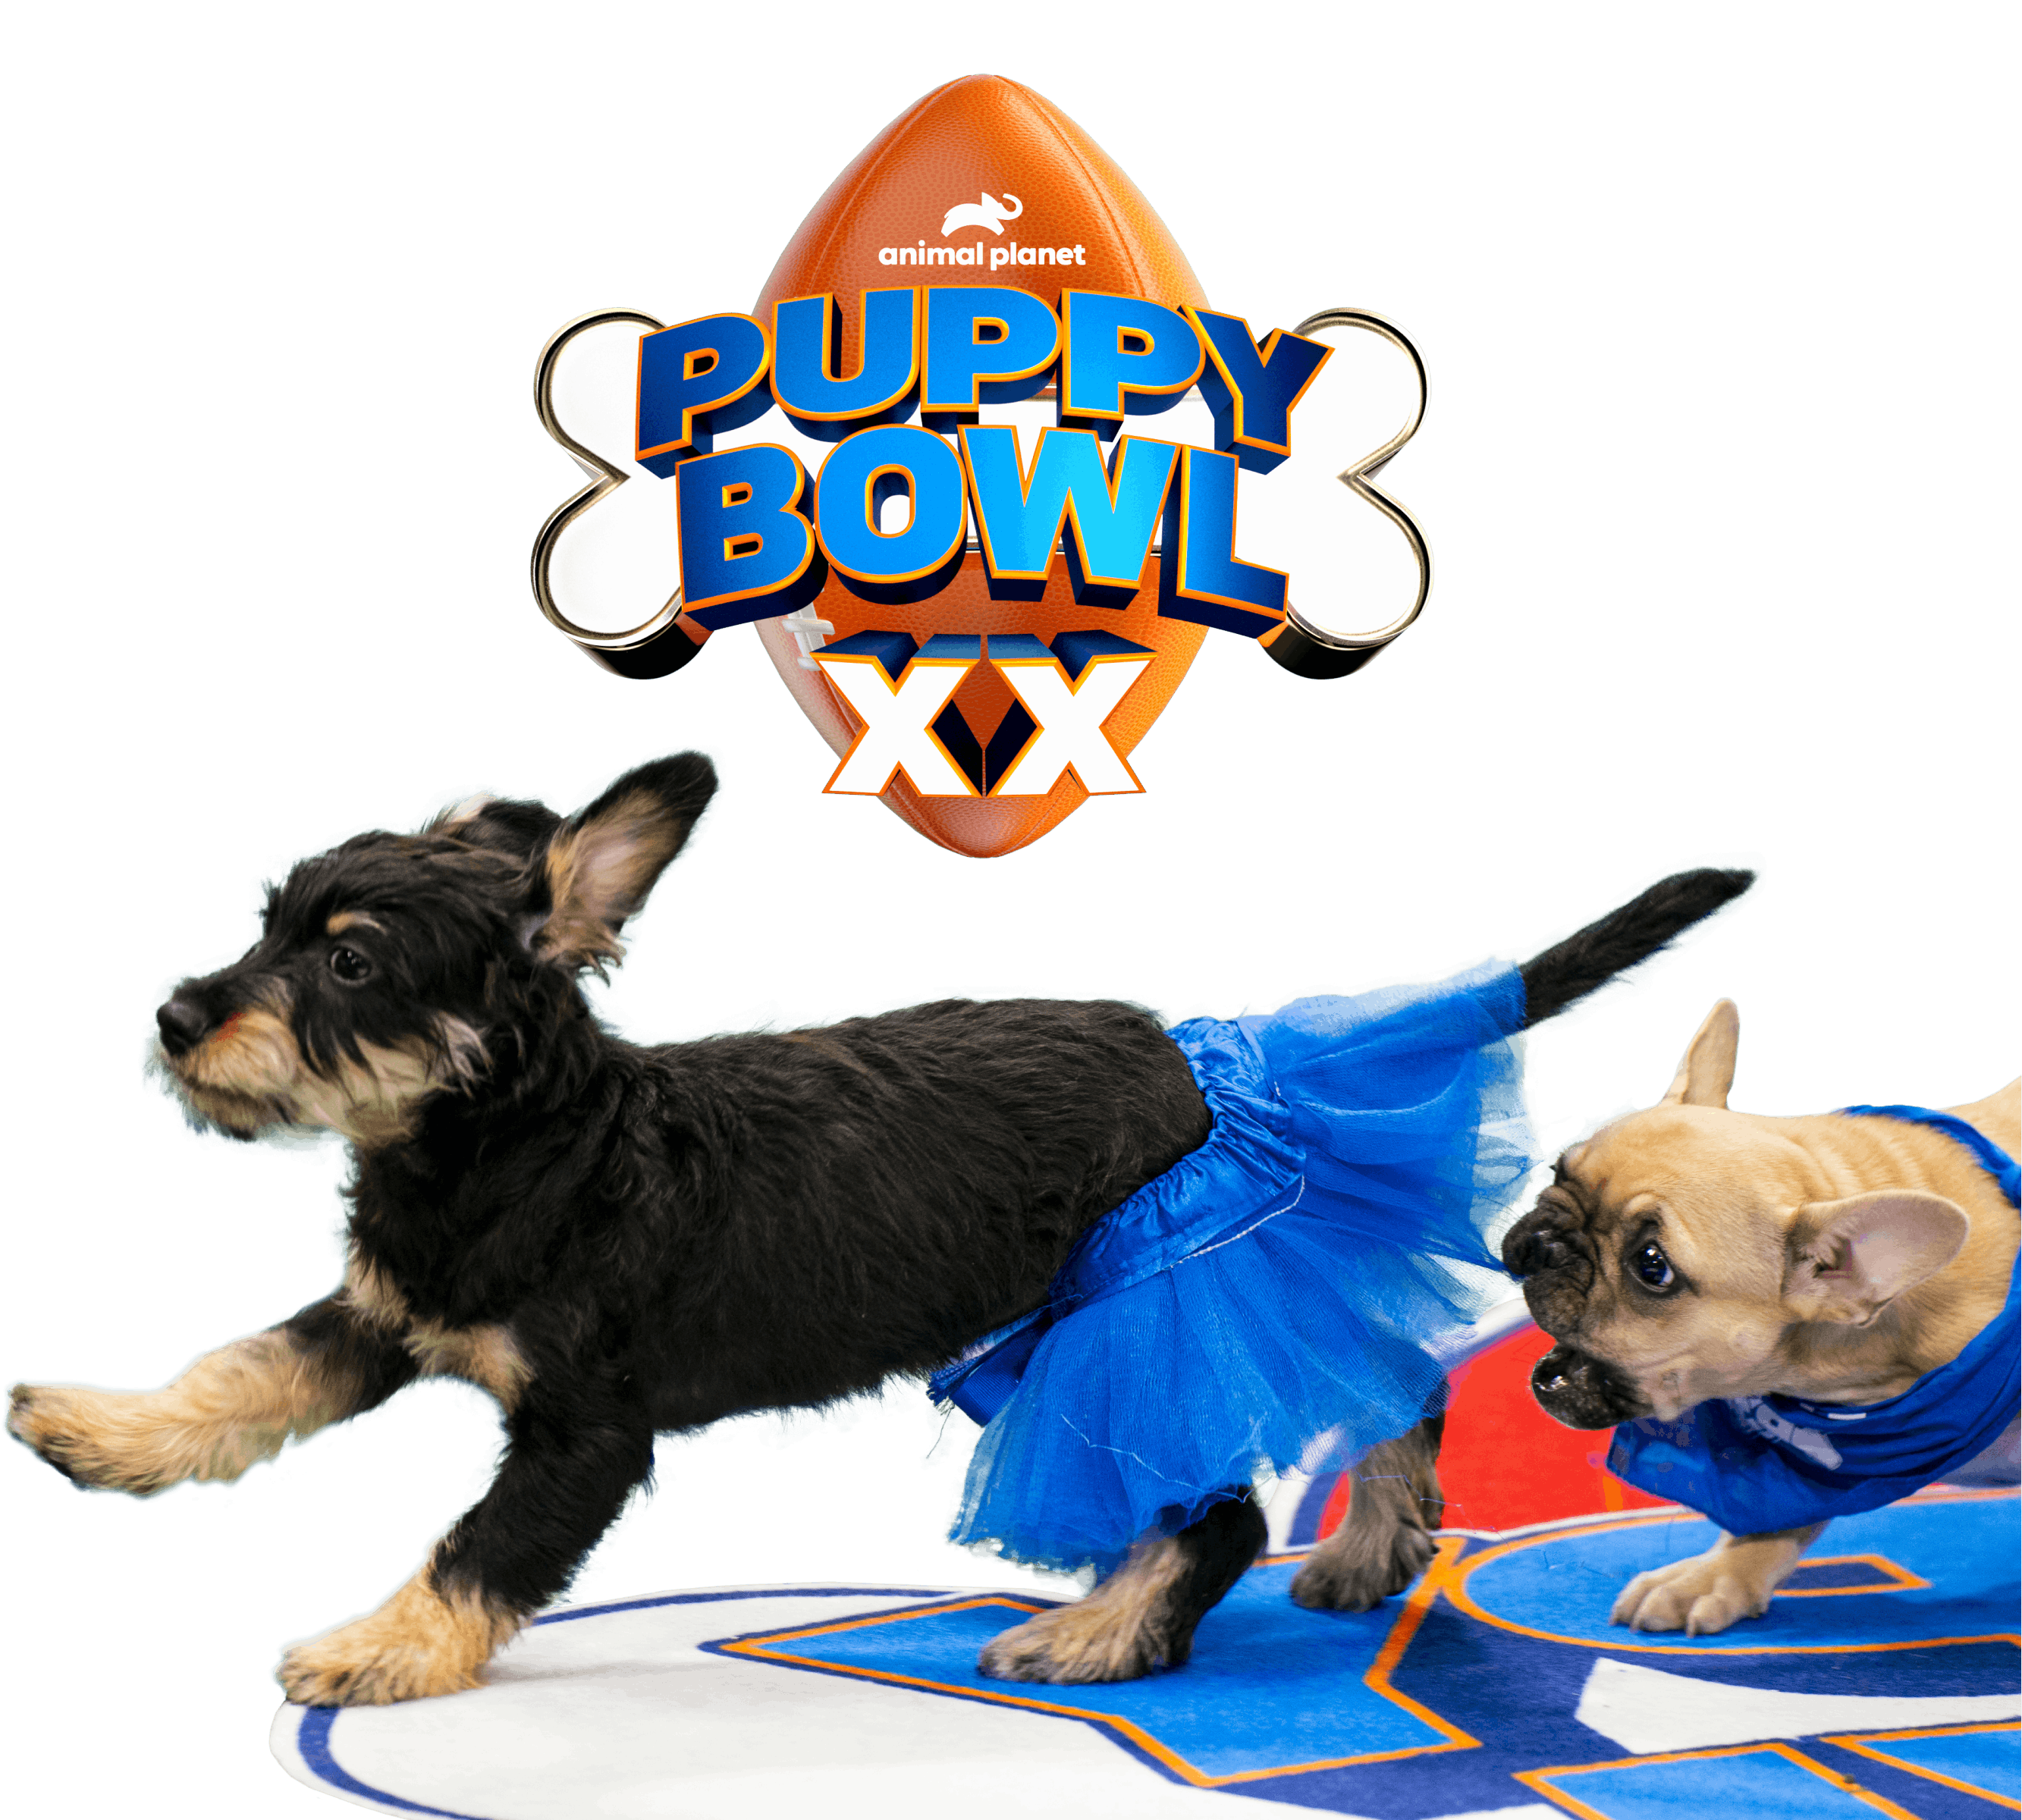 Puppy Bowl puppies chasing each other